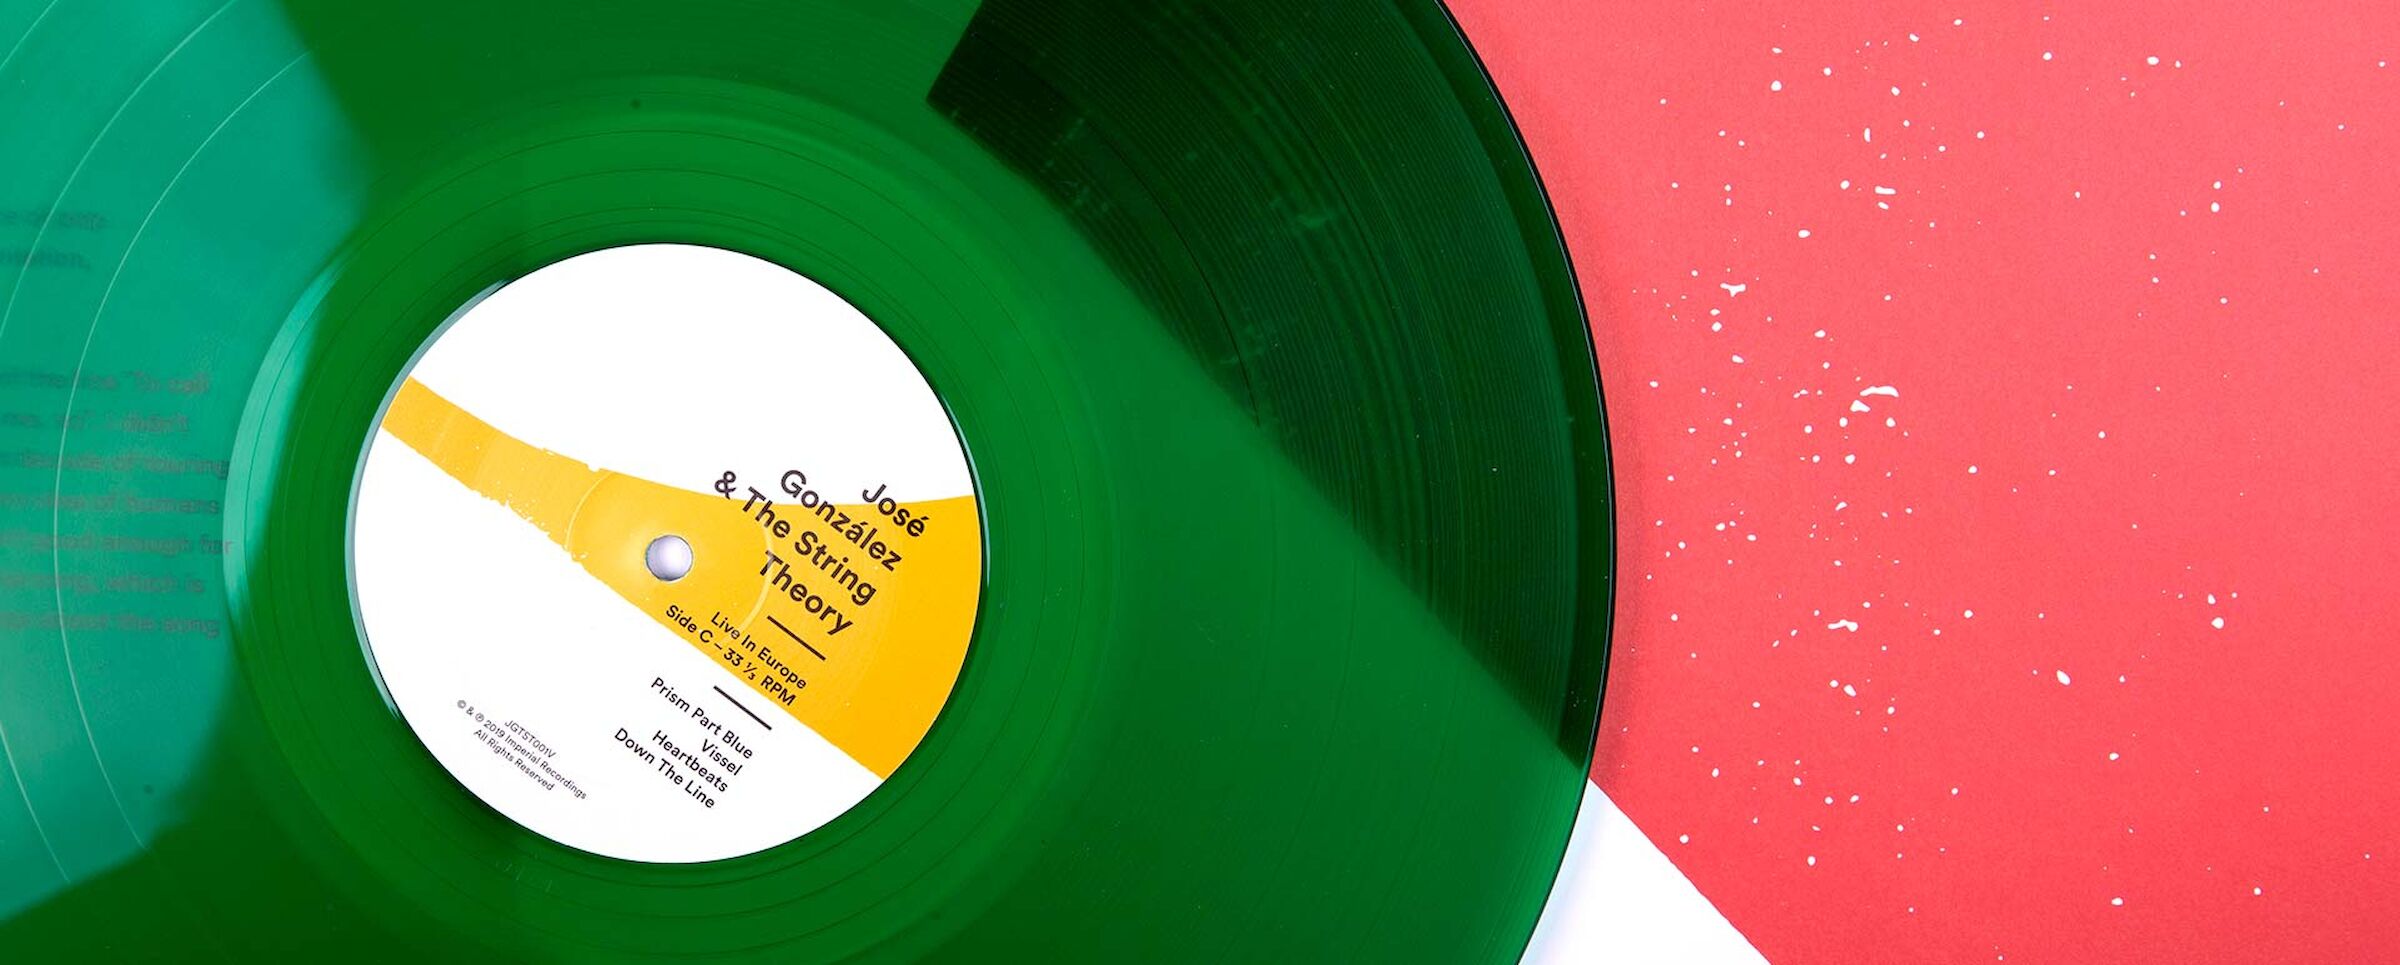 José Gonzalez and The String Theory live in Europe deluxe edition with double LP on green coloured heavyweight vinyl